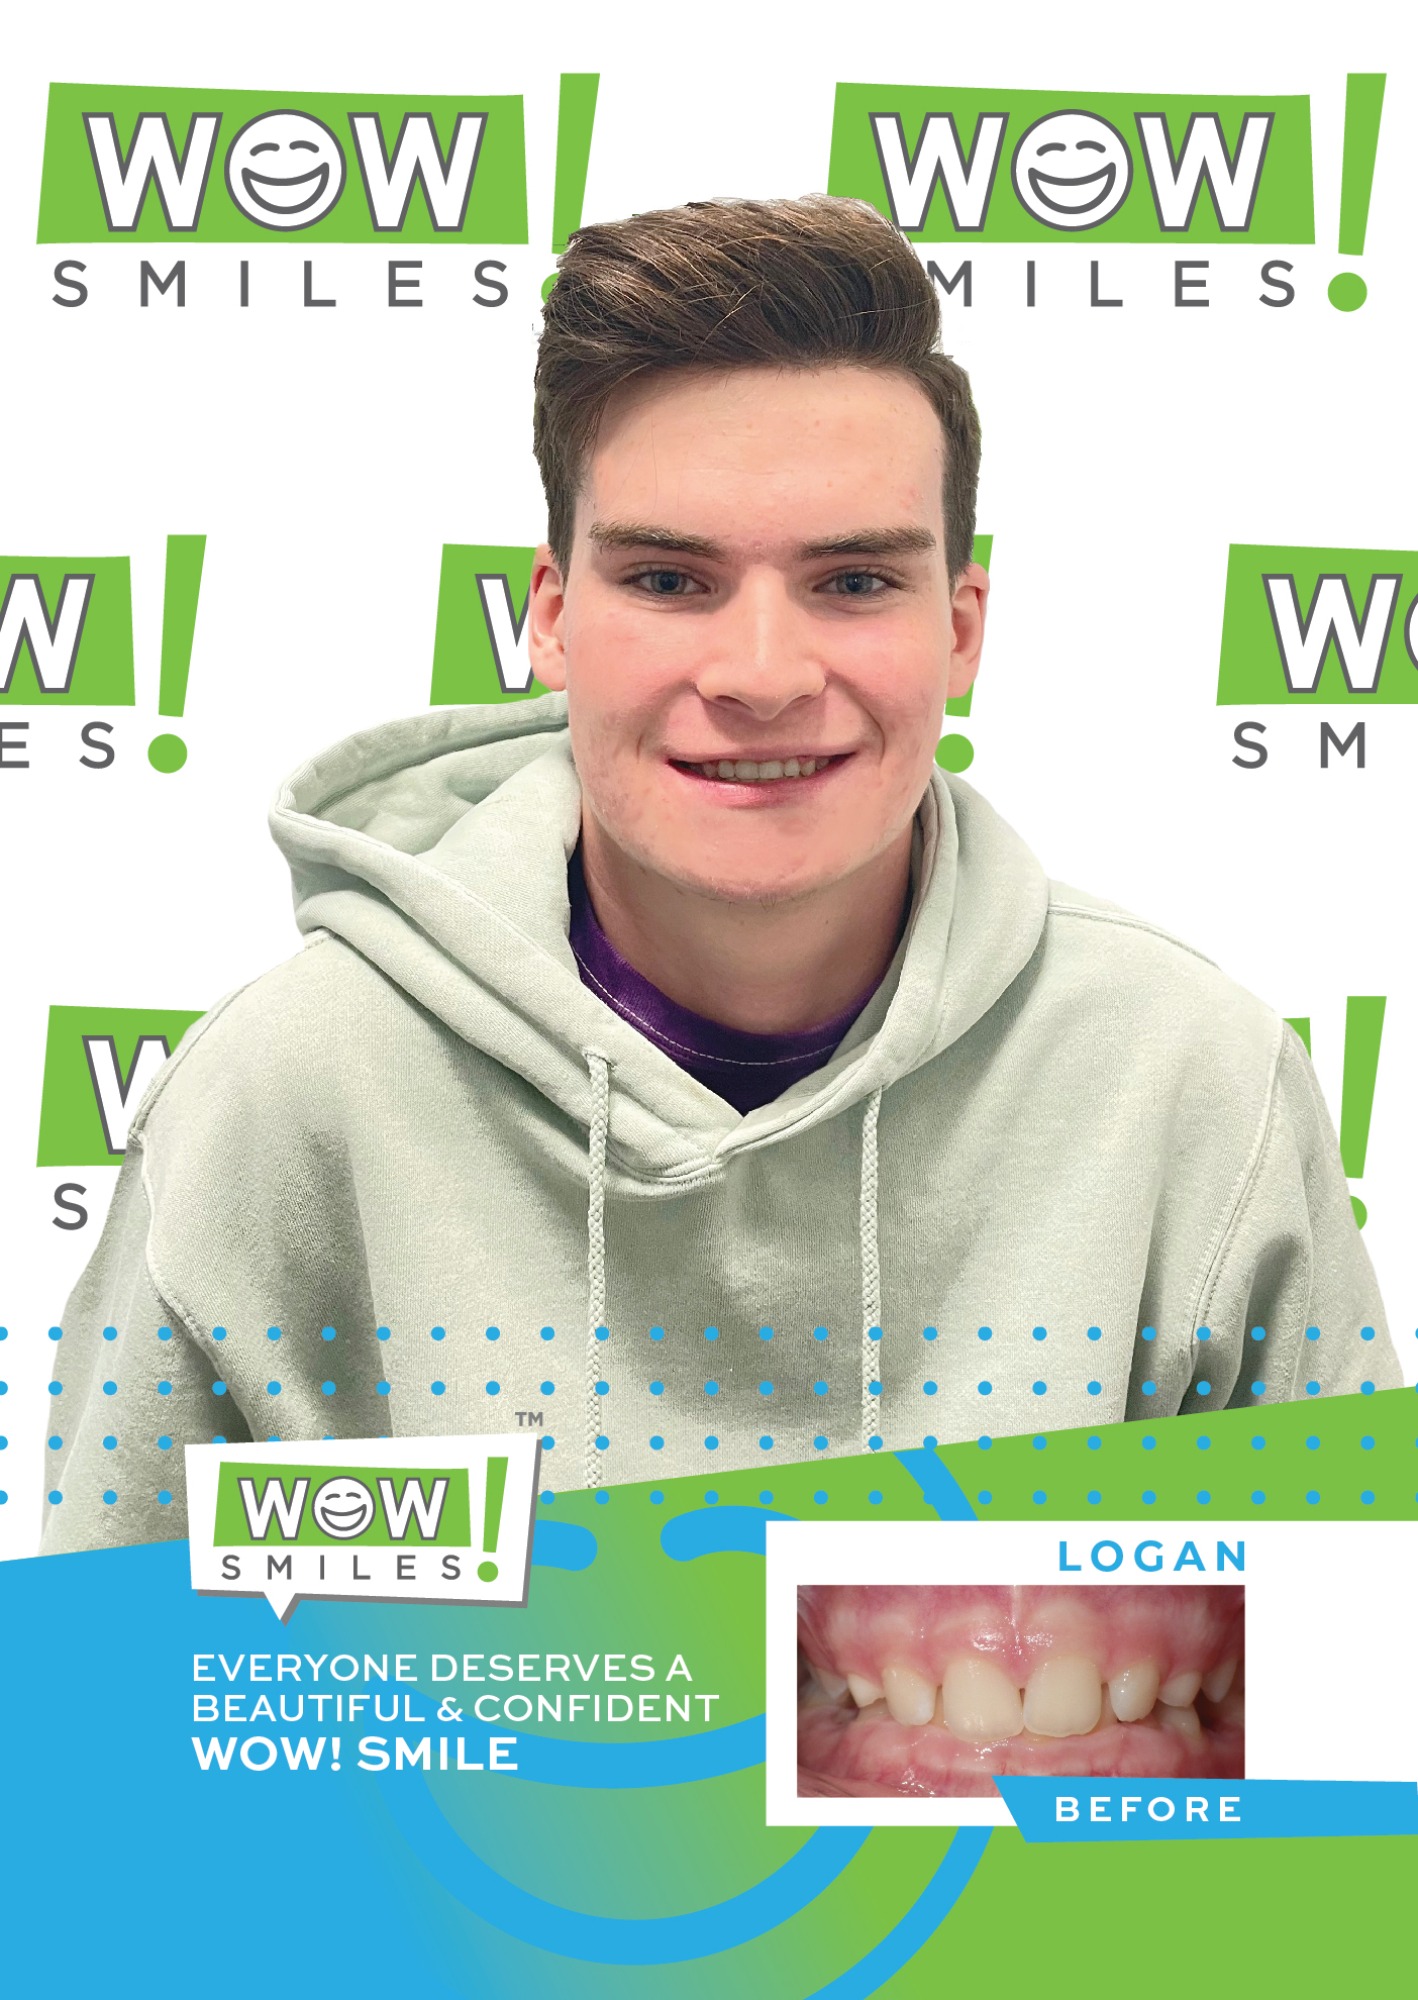 2022-07-20_Wow Smiles_Before and After Posters_Logan_CC-01